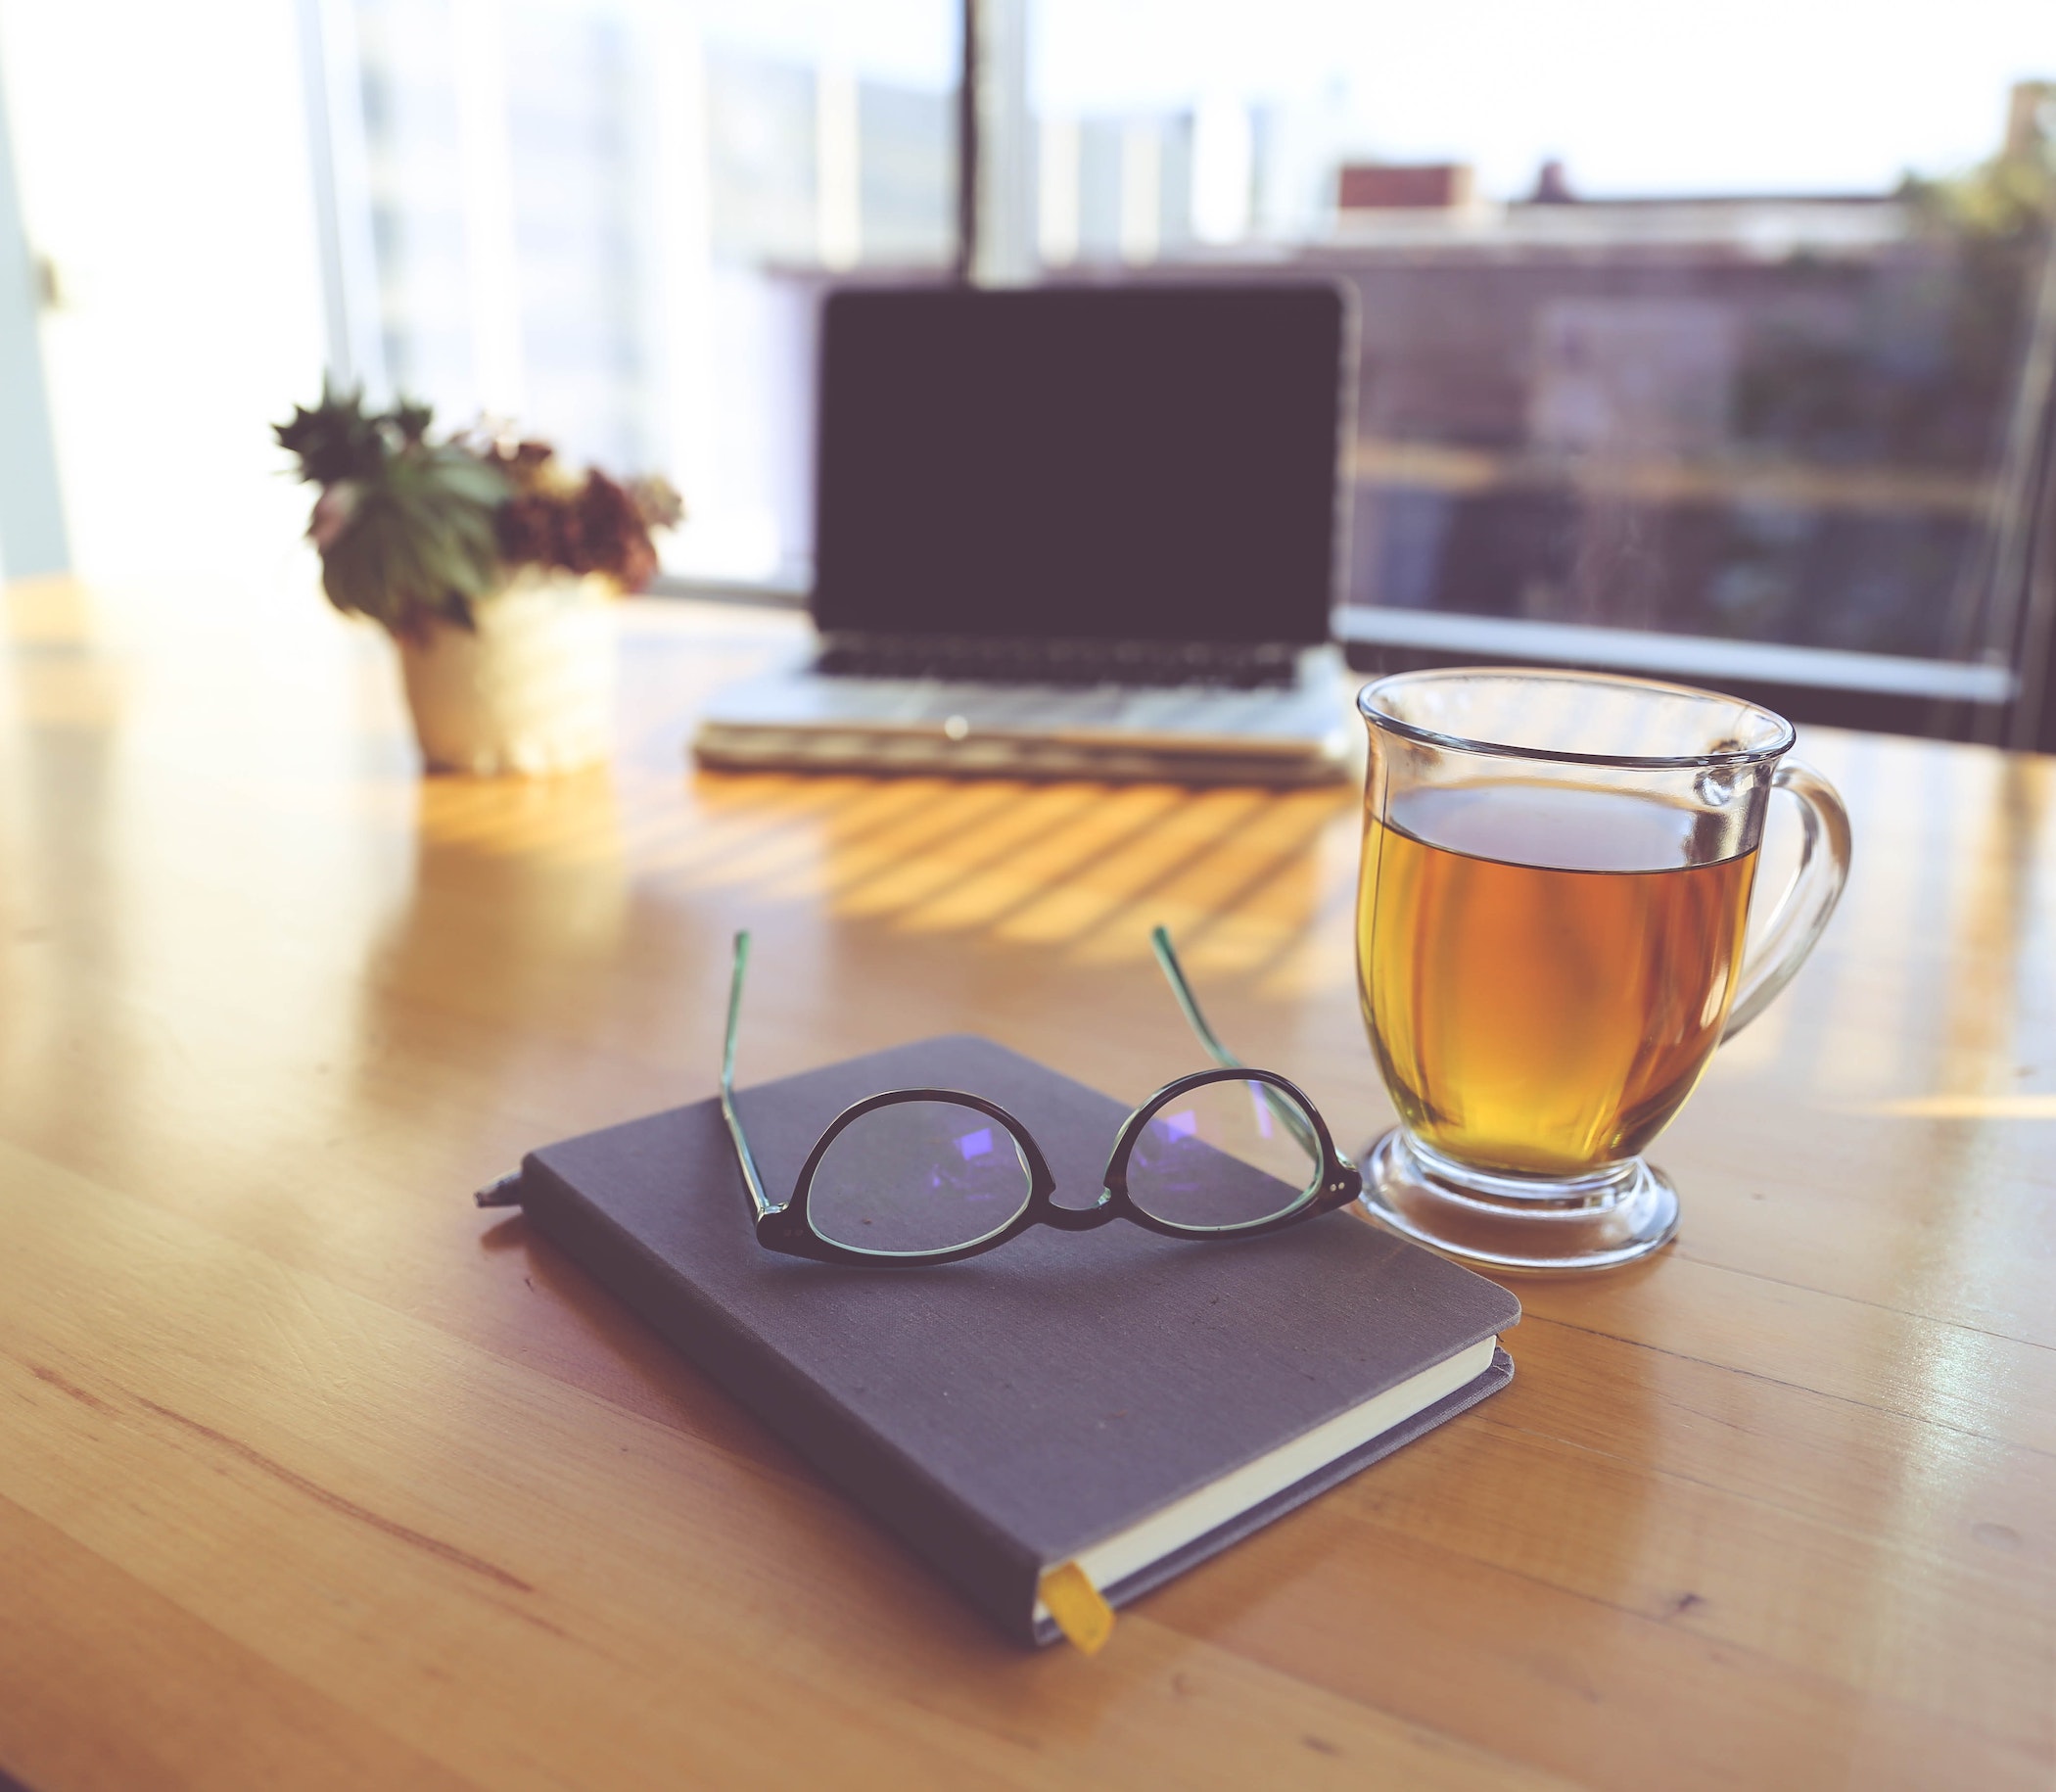 Glasses on a book next to a cup of tea